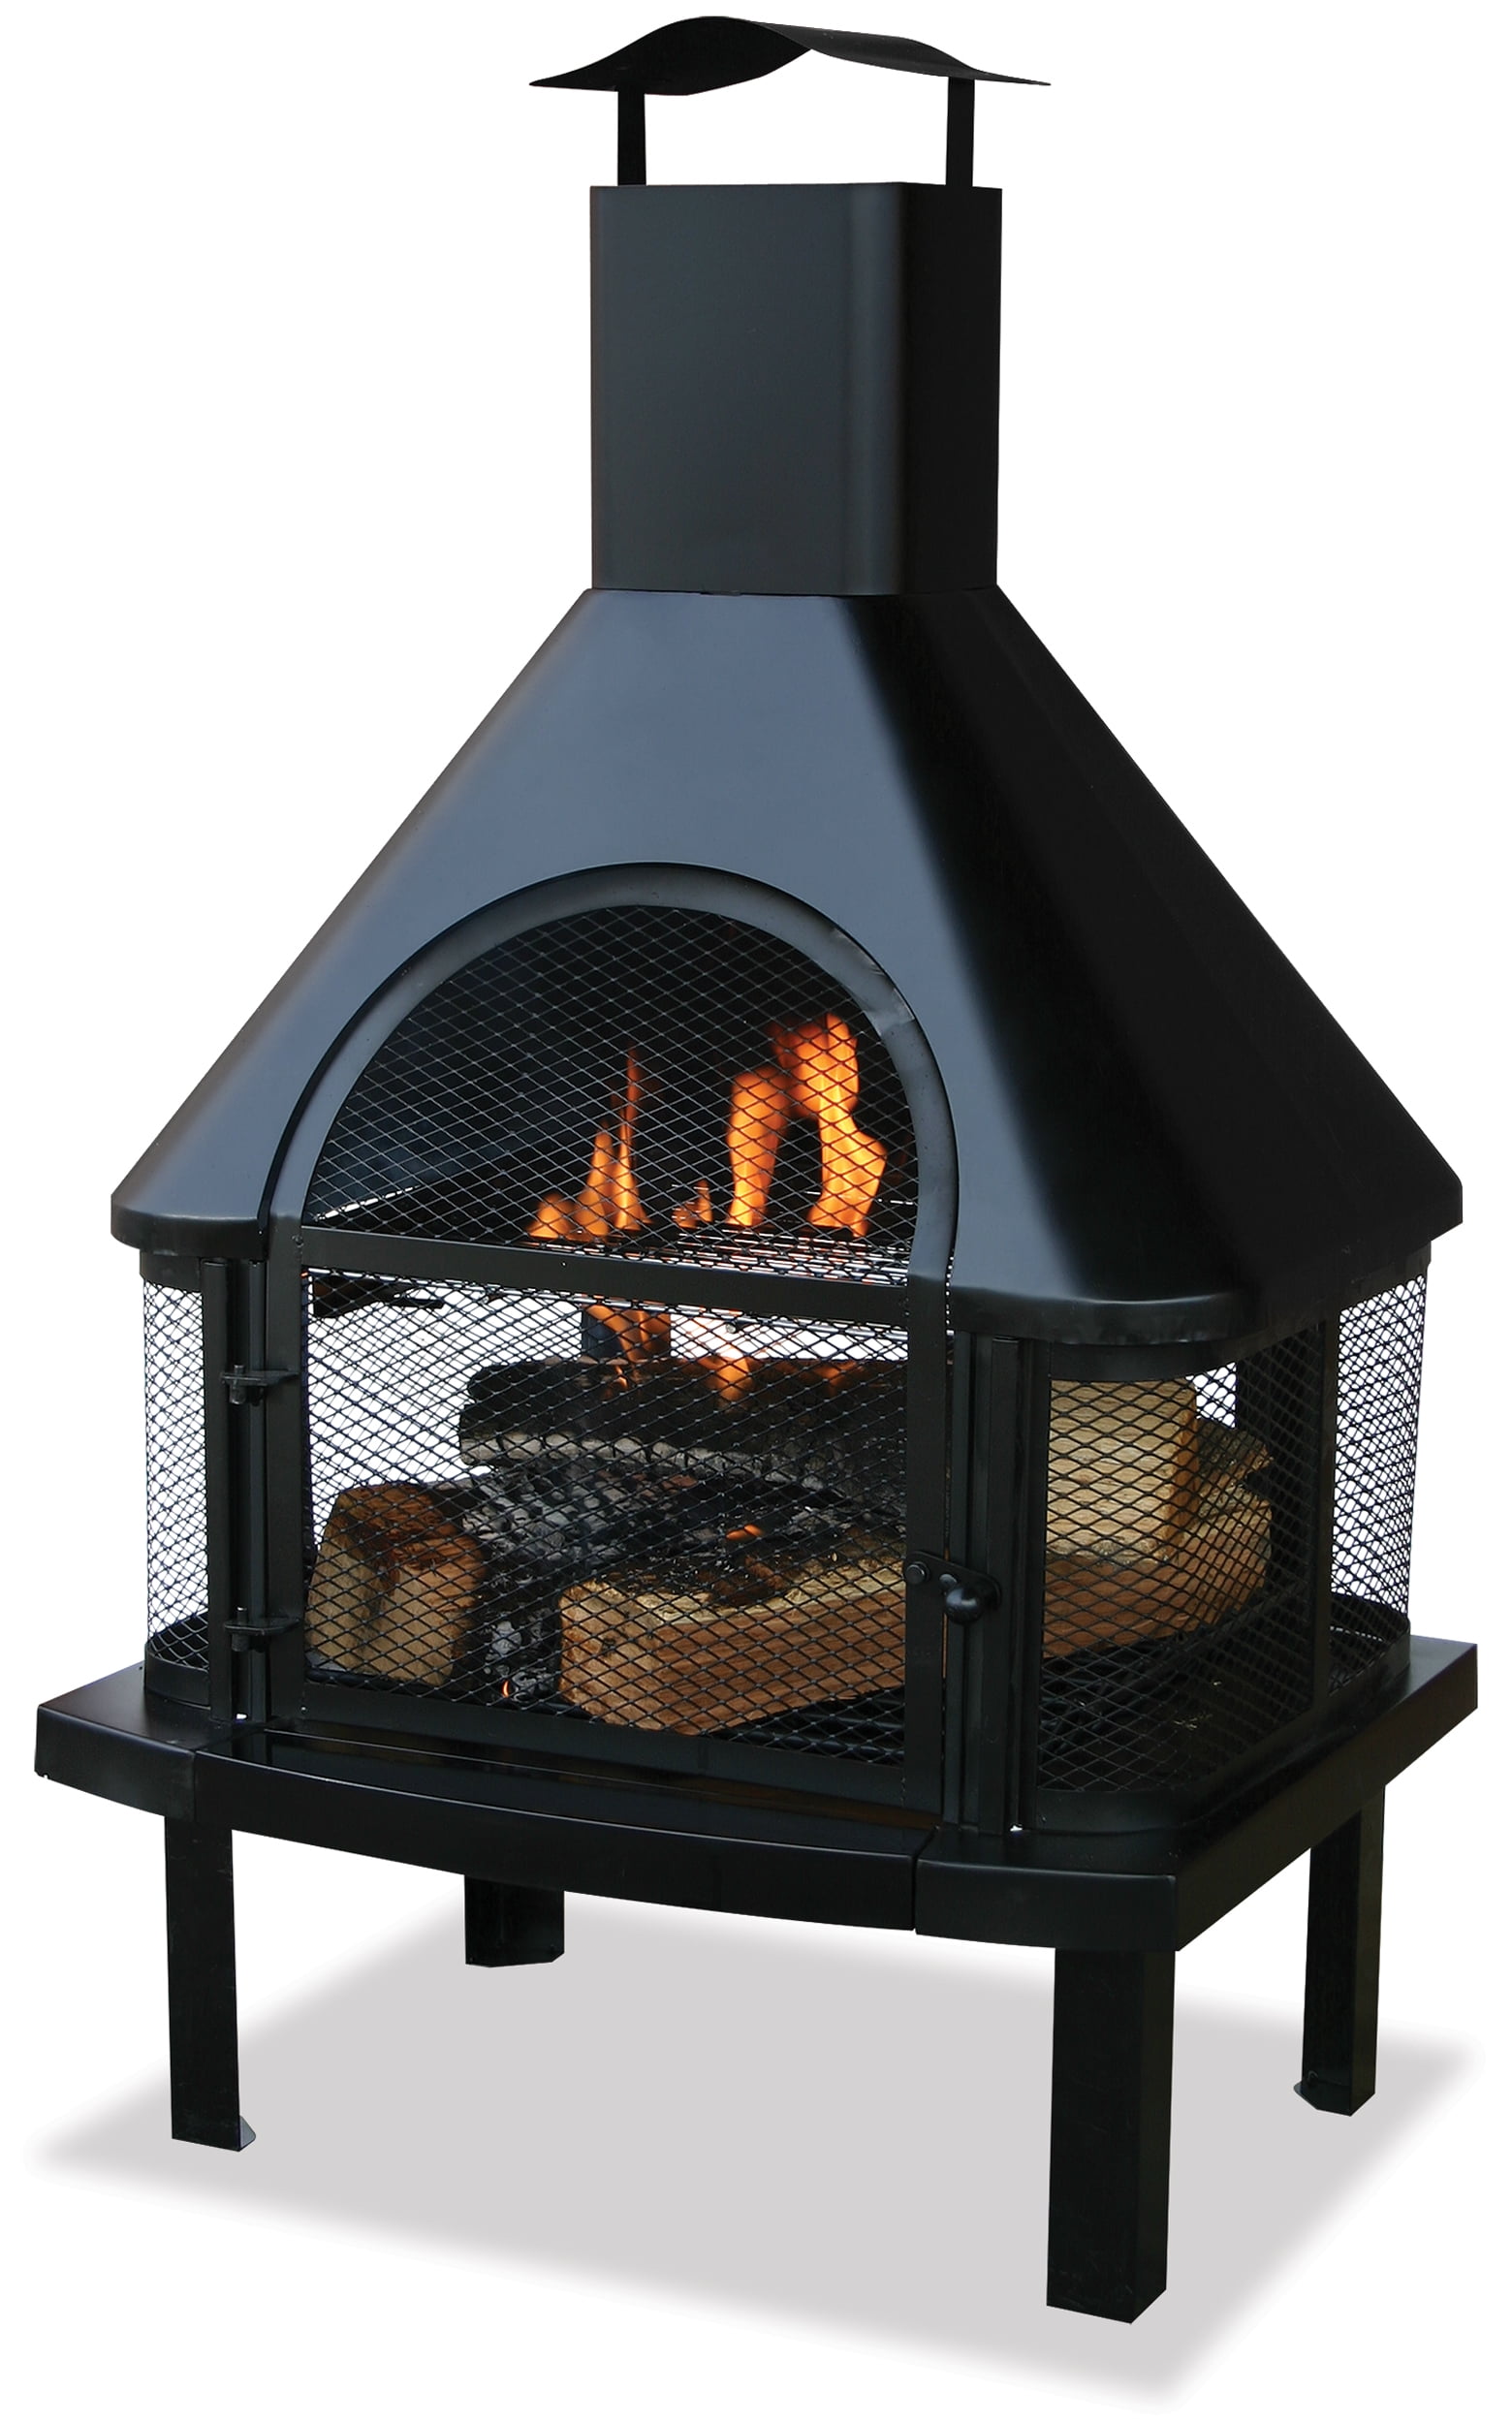 Details about   Patio Fireplace Wood Burning Steel Rolling Portable Fire Pit Stove Round Screen 